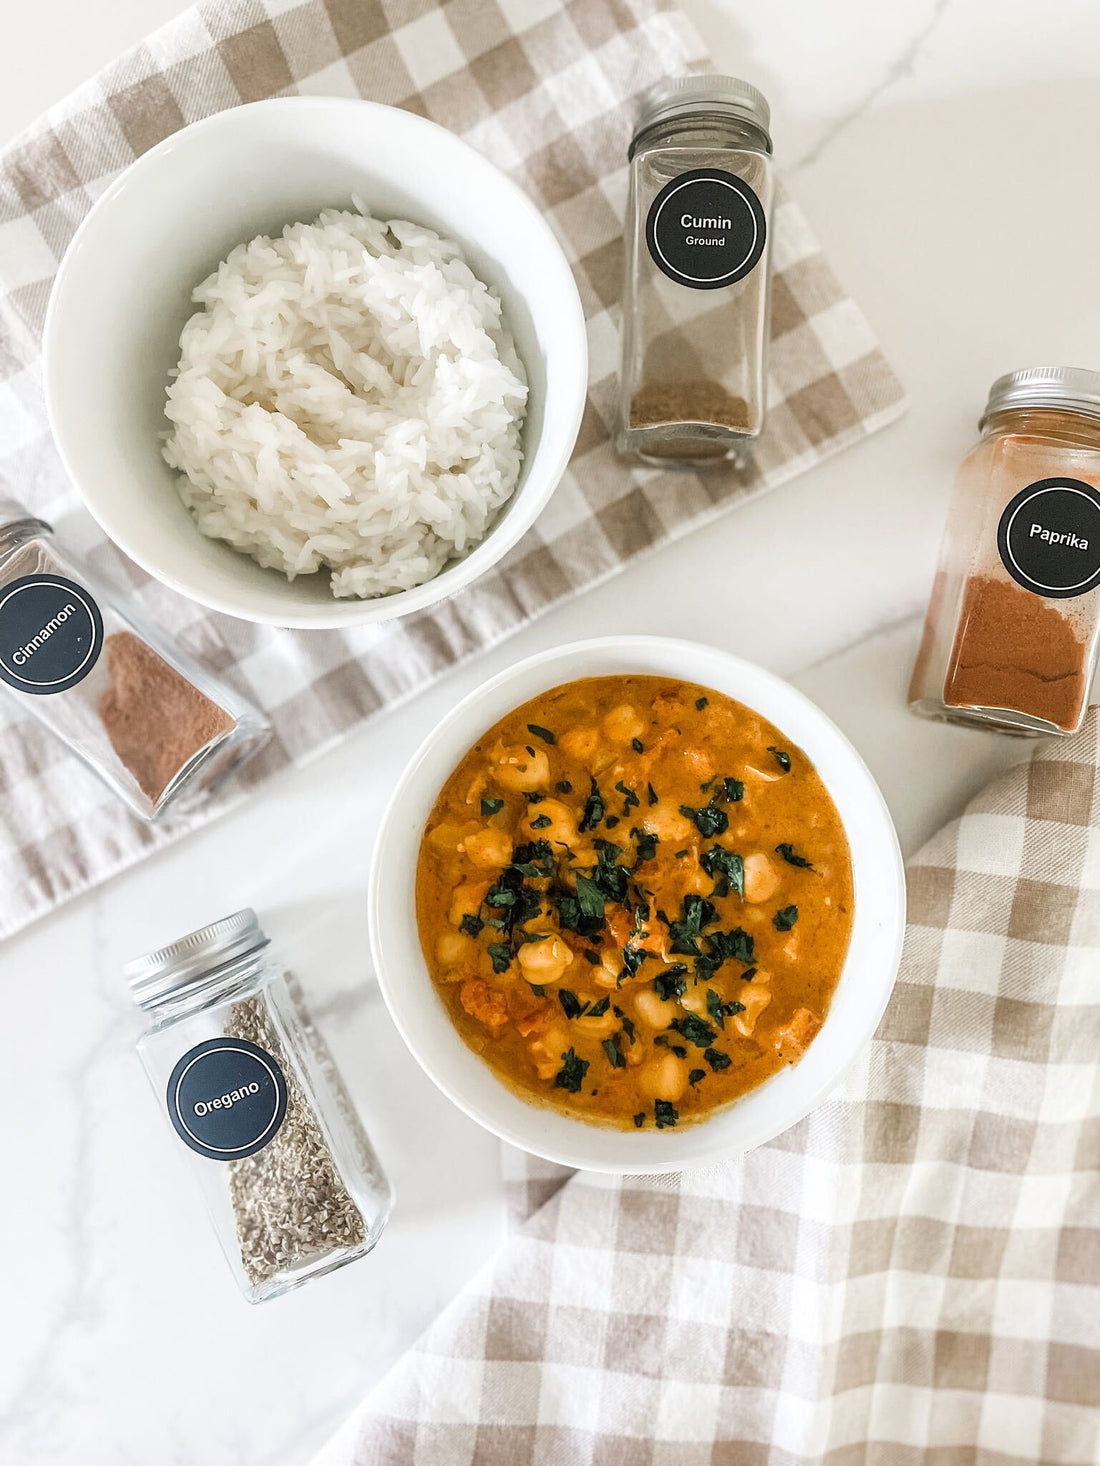 Seven Spice Chickpea Stew - July 22 - St. Mary Magdalene